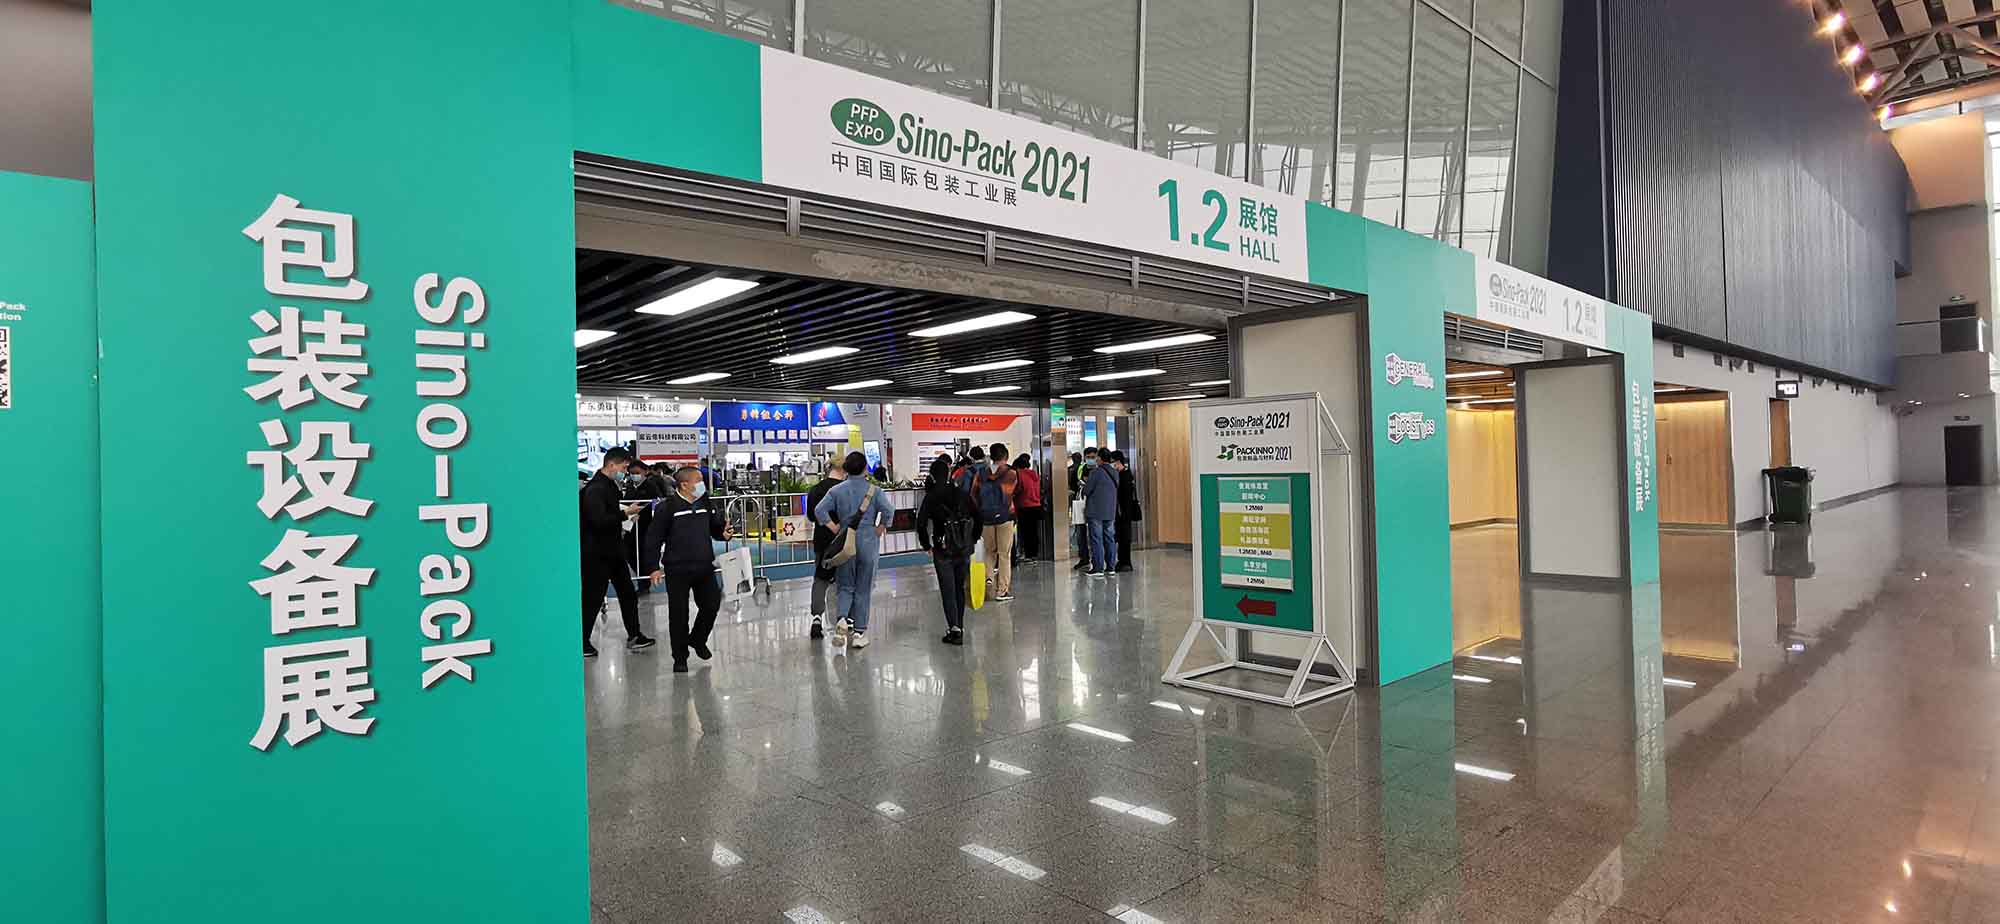 Sino-Pack Guangzhou Packaging Industry Exhibition